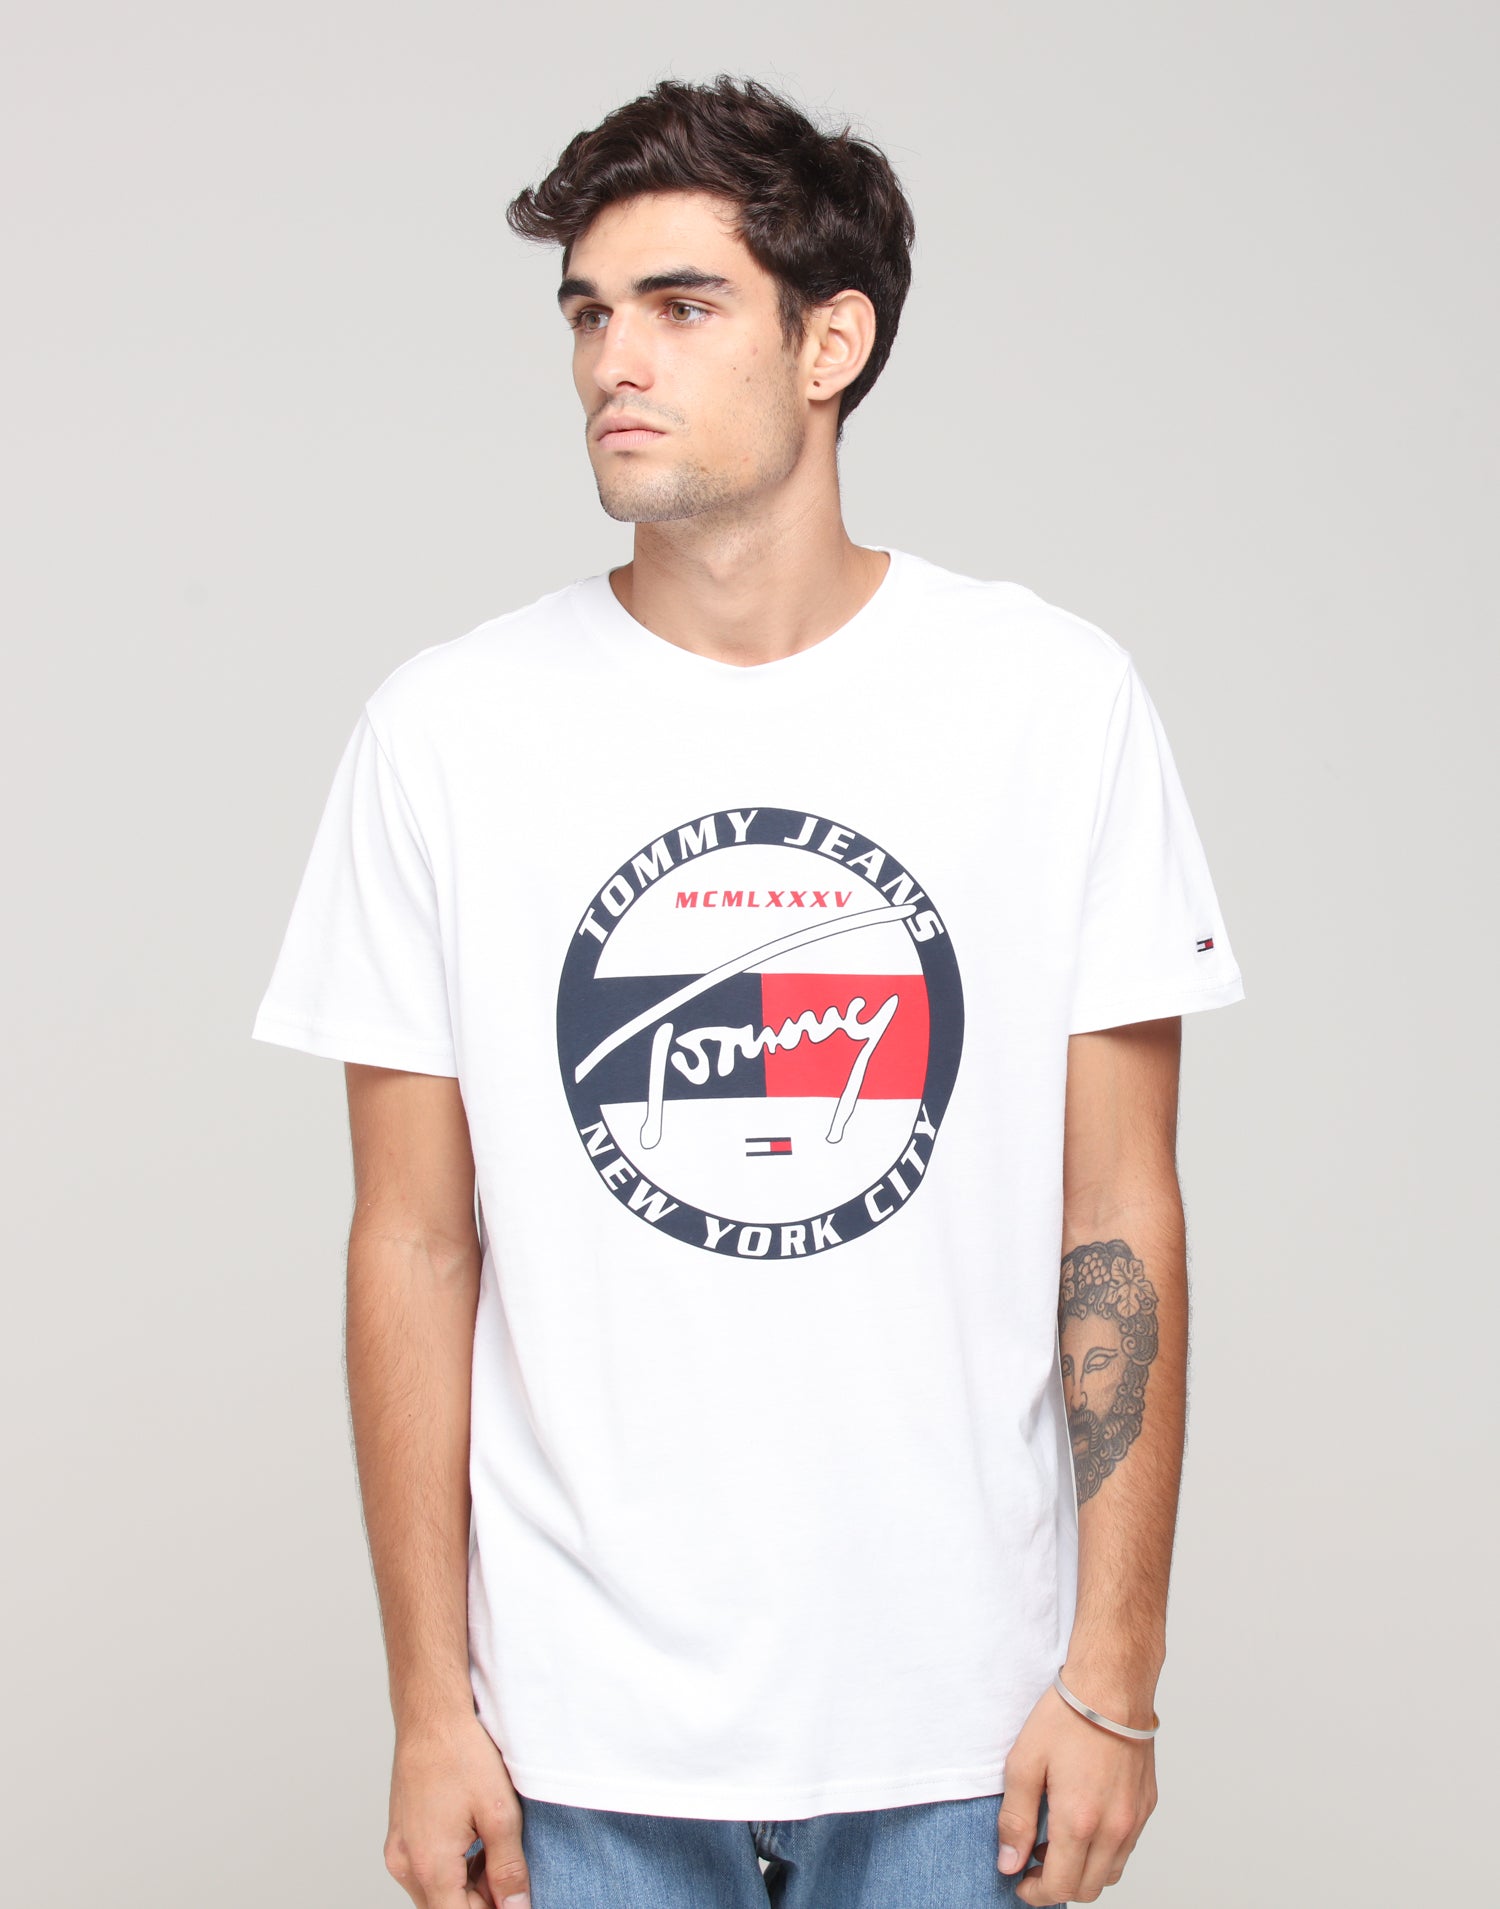 tommy circle tee